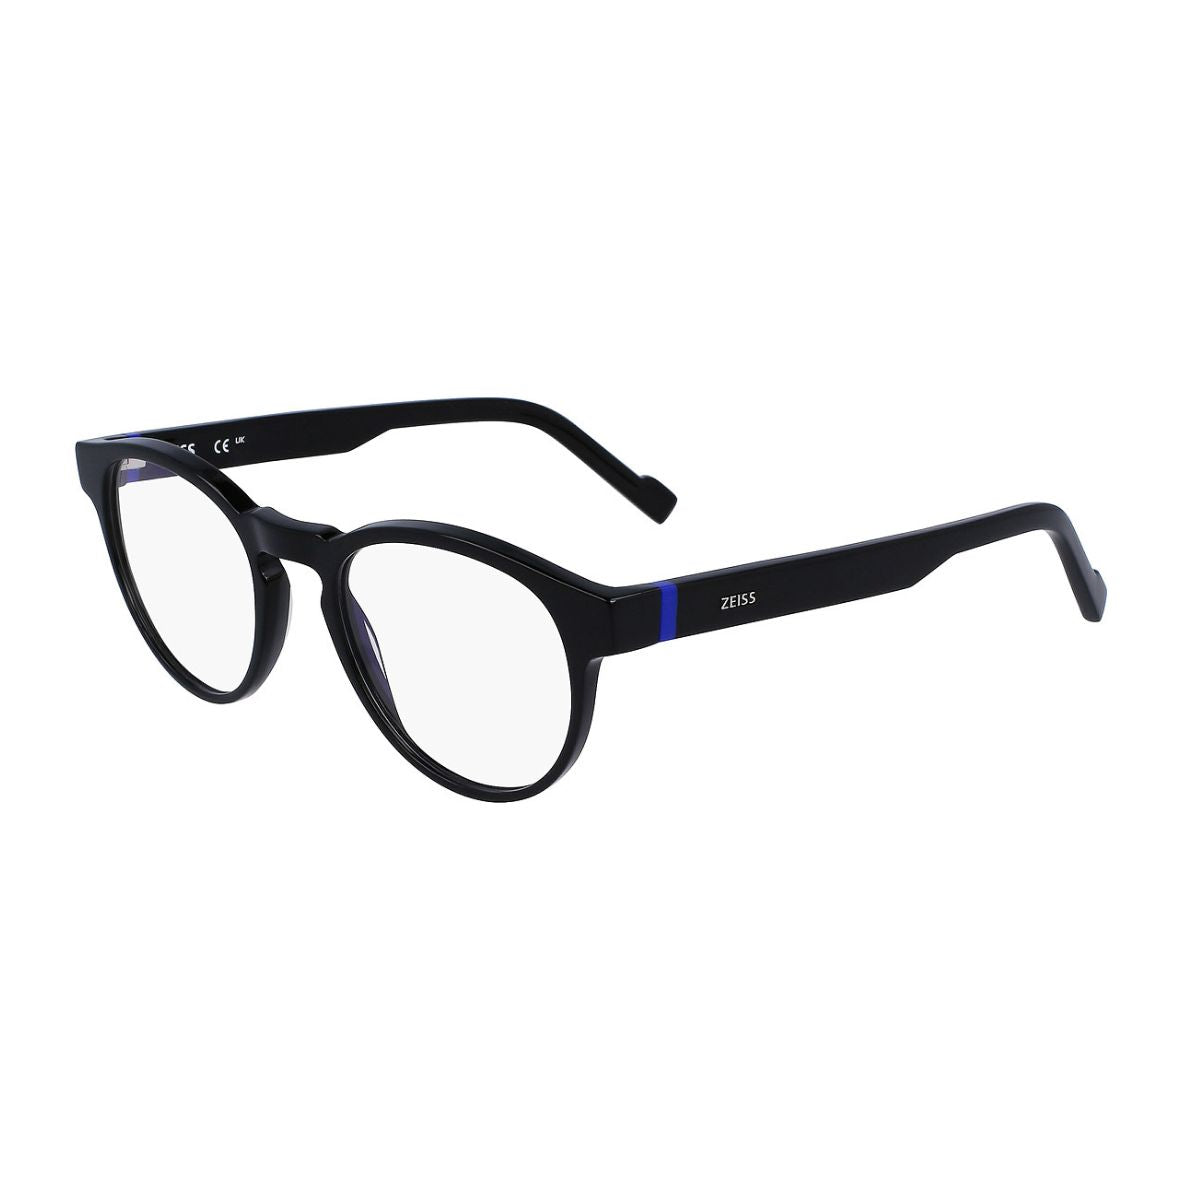 "buy Zeiss 23535 001 spactacle frame for men's and women's at optorium"